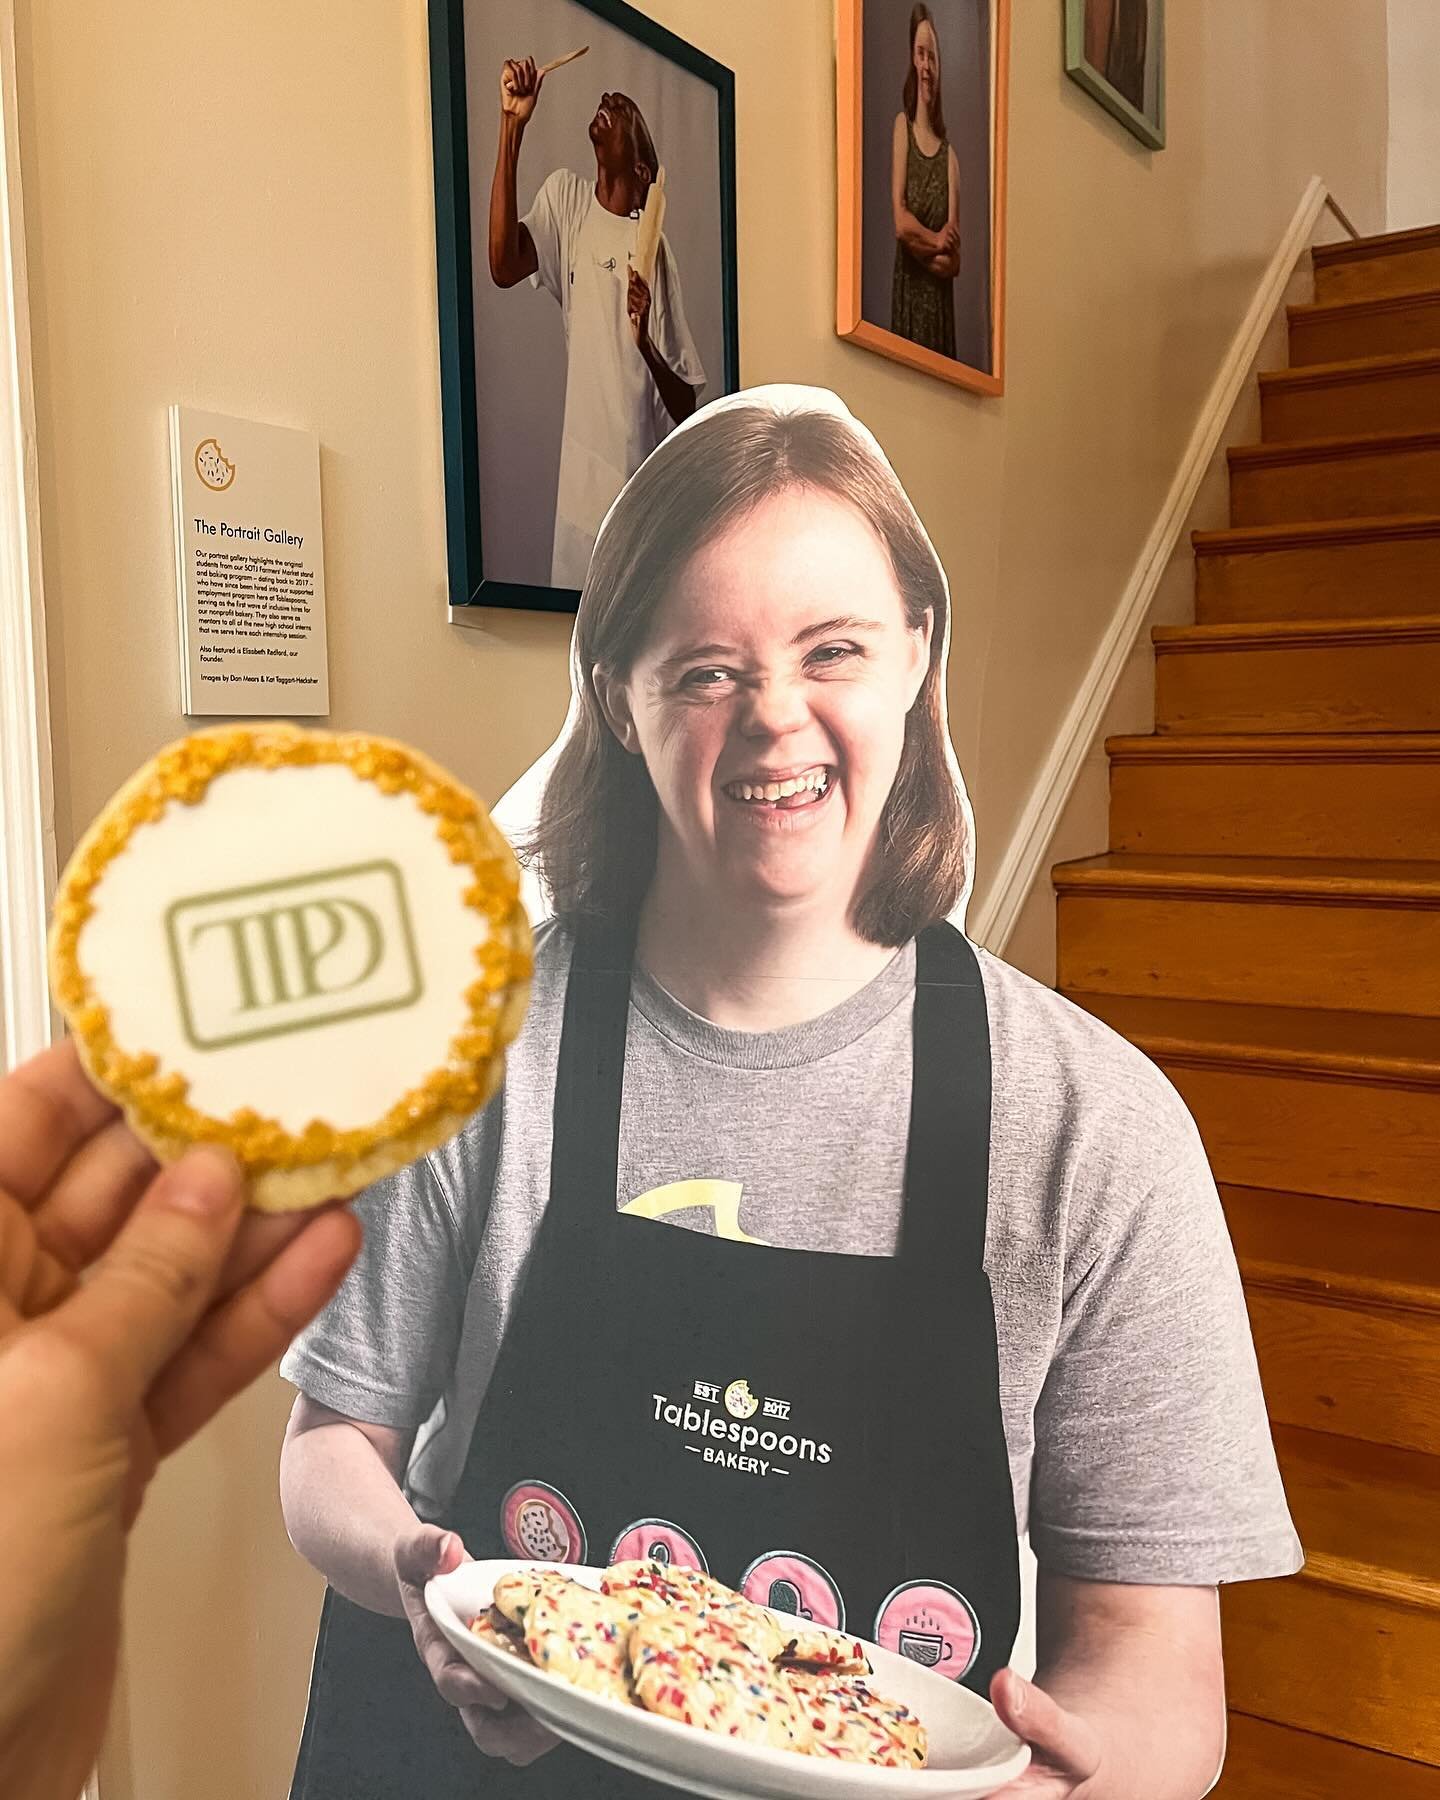 Calling all fellow Swifites! We will have some of our sugar ink printed Taylor Swift album cookies in the case on Friday - just in time for your TTPD listening party! We will be open 8-12.

Spread the word!